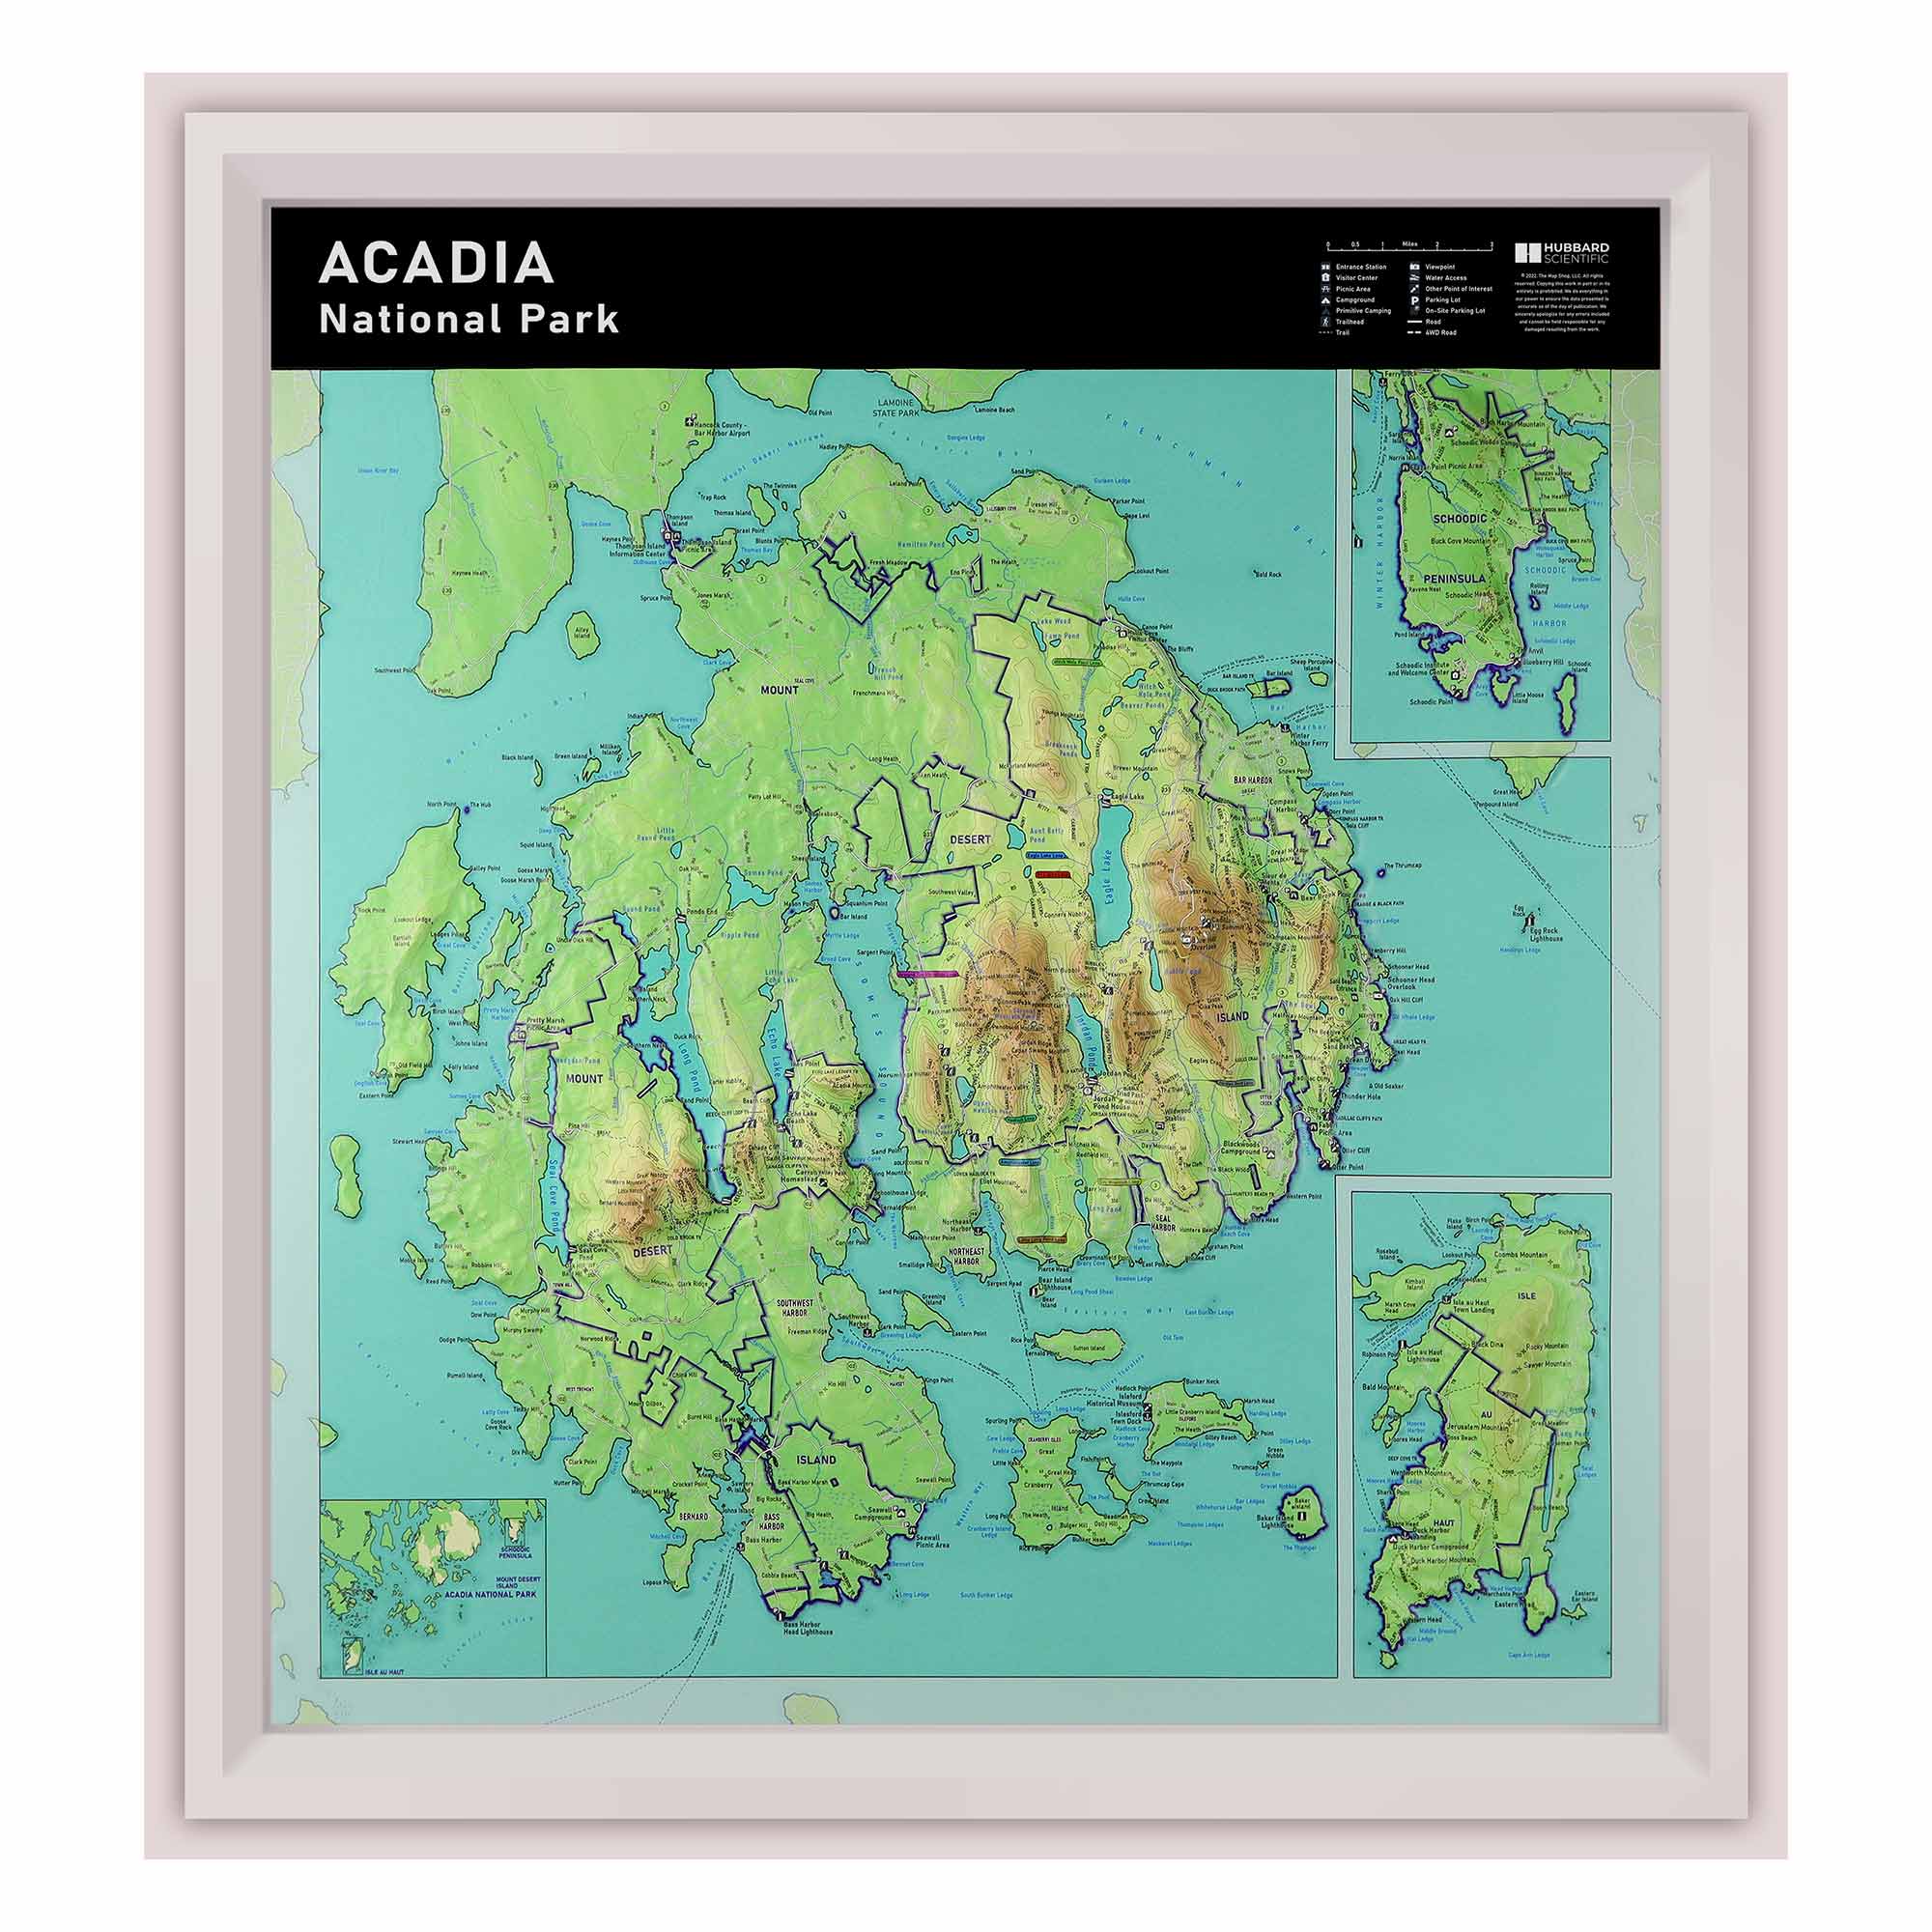 Raised relief 3D map of Acadia National Park, Maine, depicting Mount Desert Island, Schoodic Peninsula, and Isle au Haut in three-dimensional detail. The map shows mountains, valleys, lakes, and the coastline of the park.